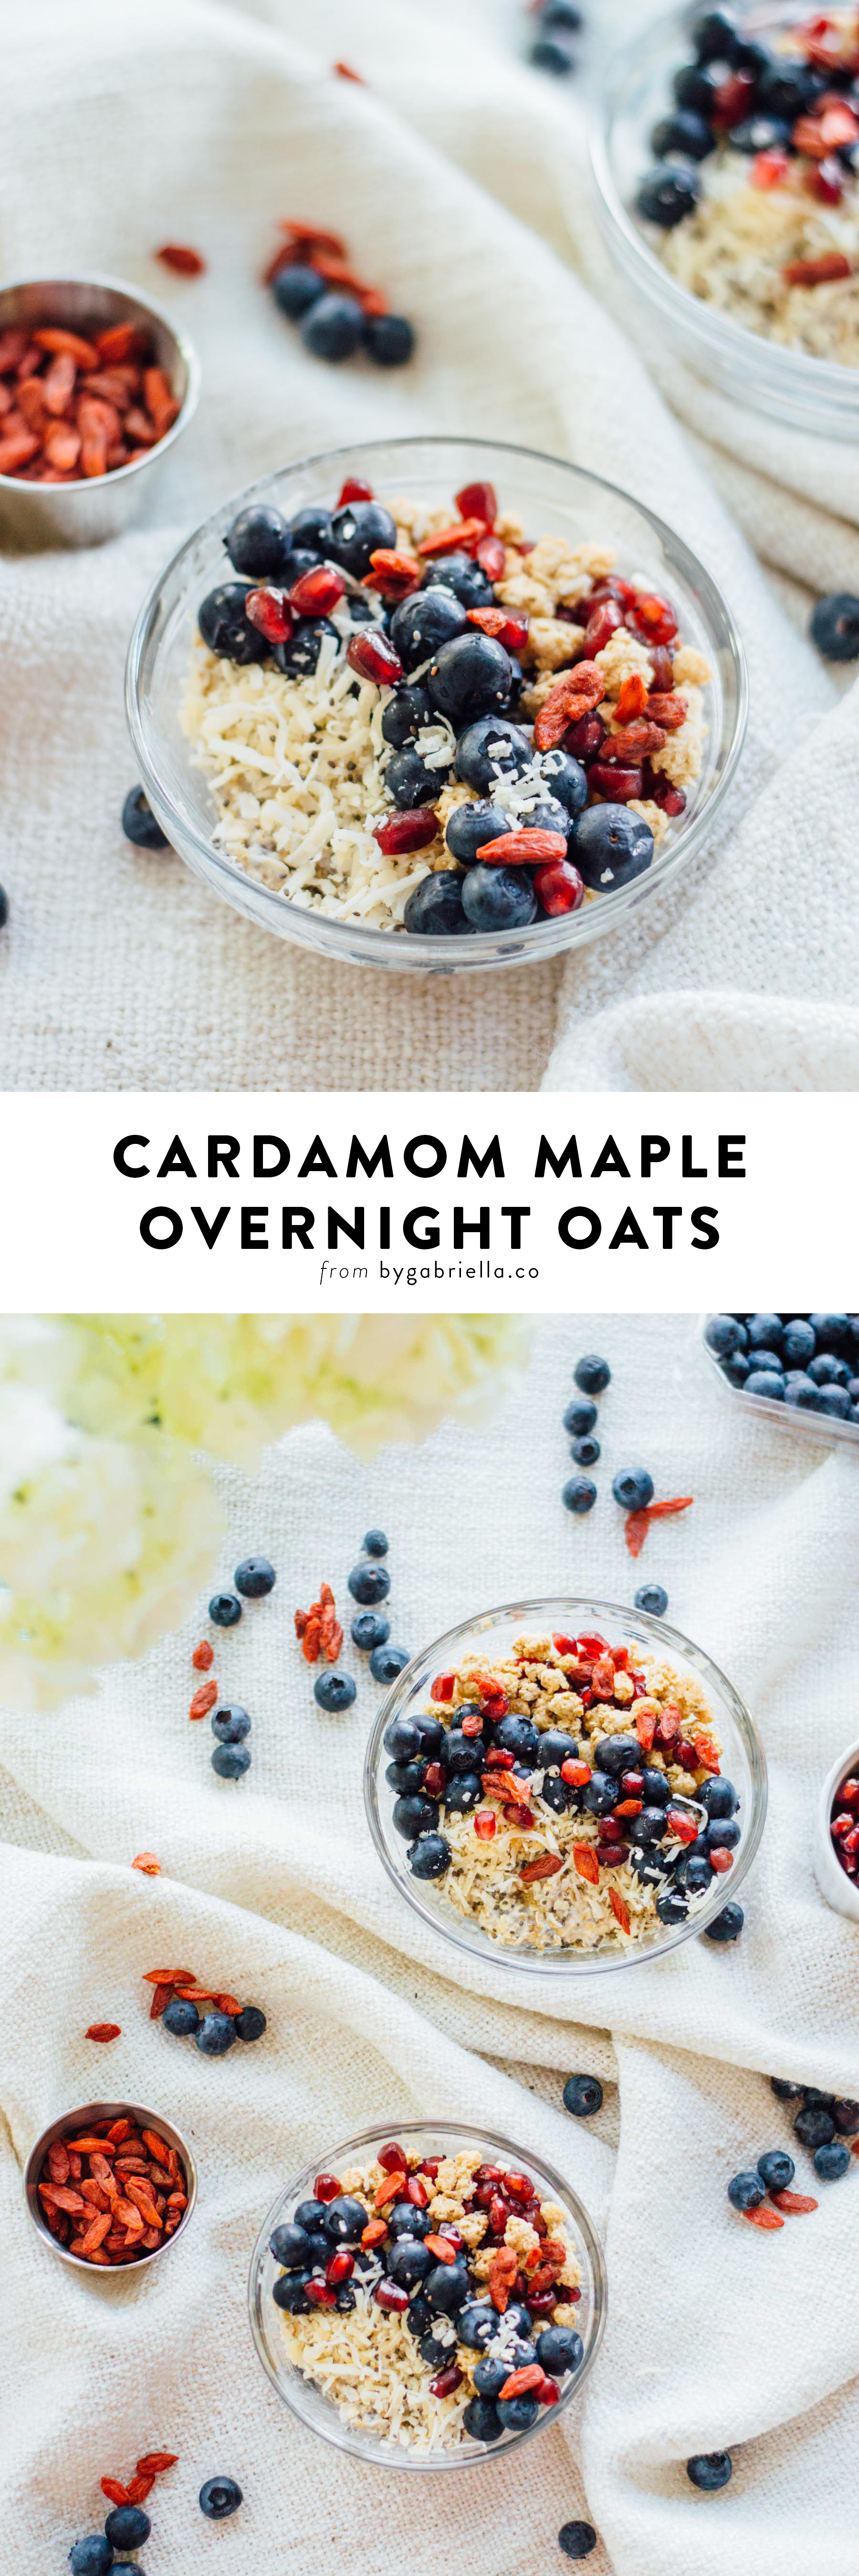 Super easy & tasty Cardamom Maple Overnight Oats breakfast recipe. Let it sit in the fridge overnight then grab and go in the morning! | Full recipe at bygabriella.co